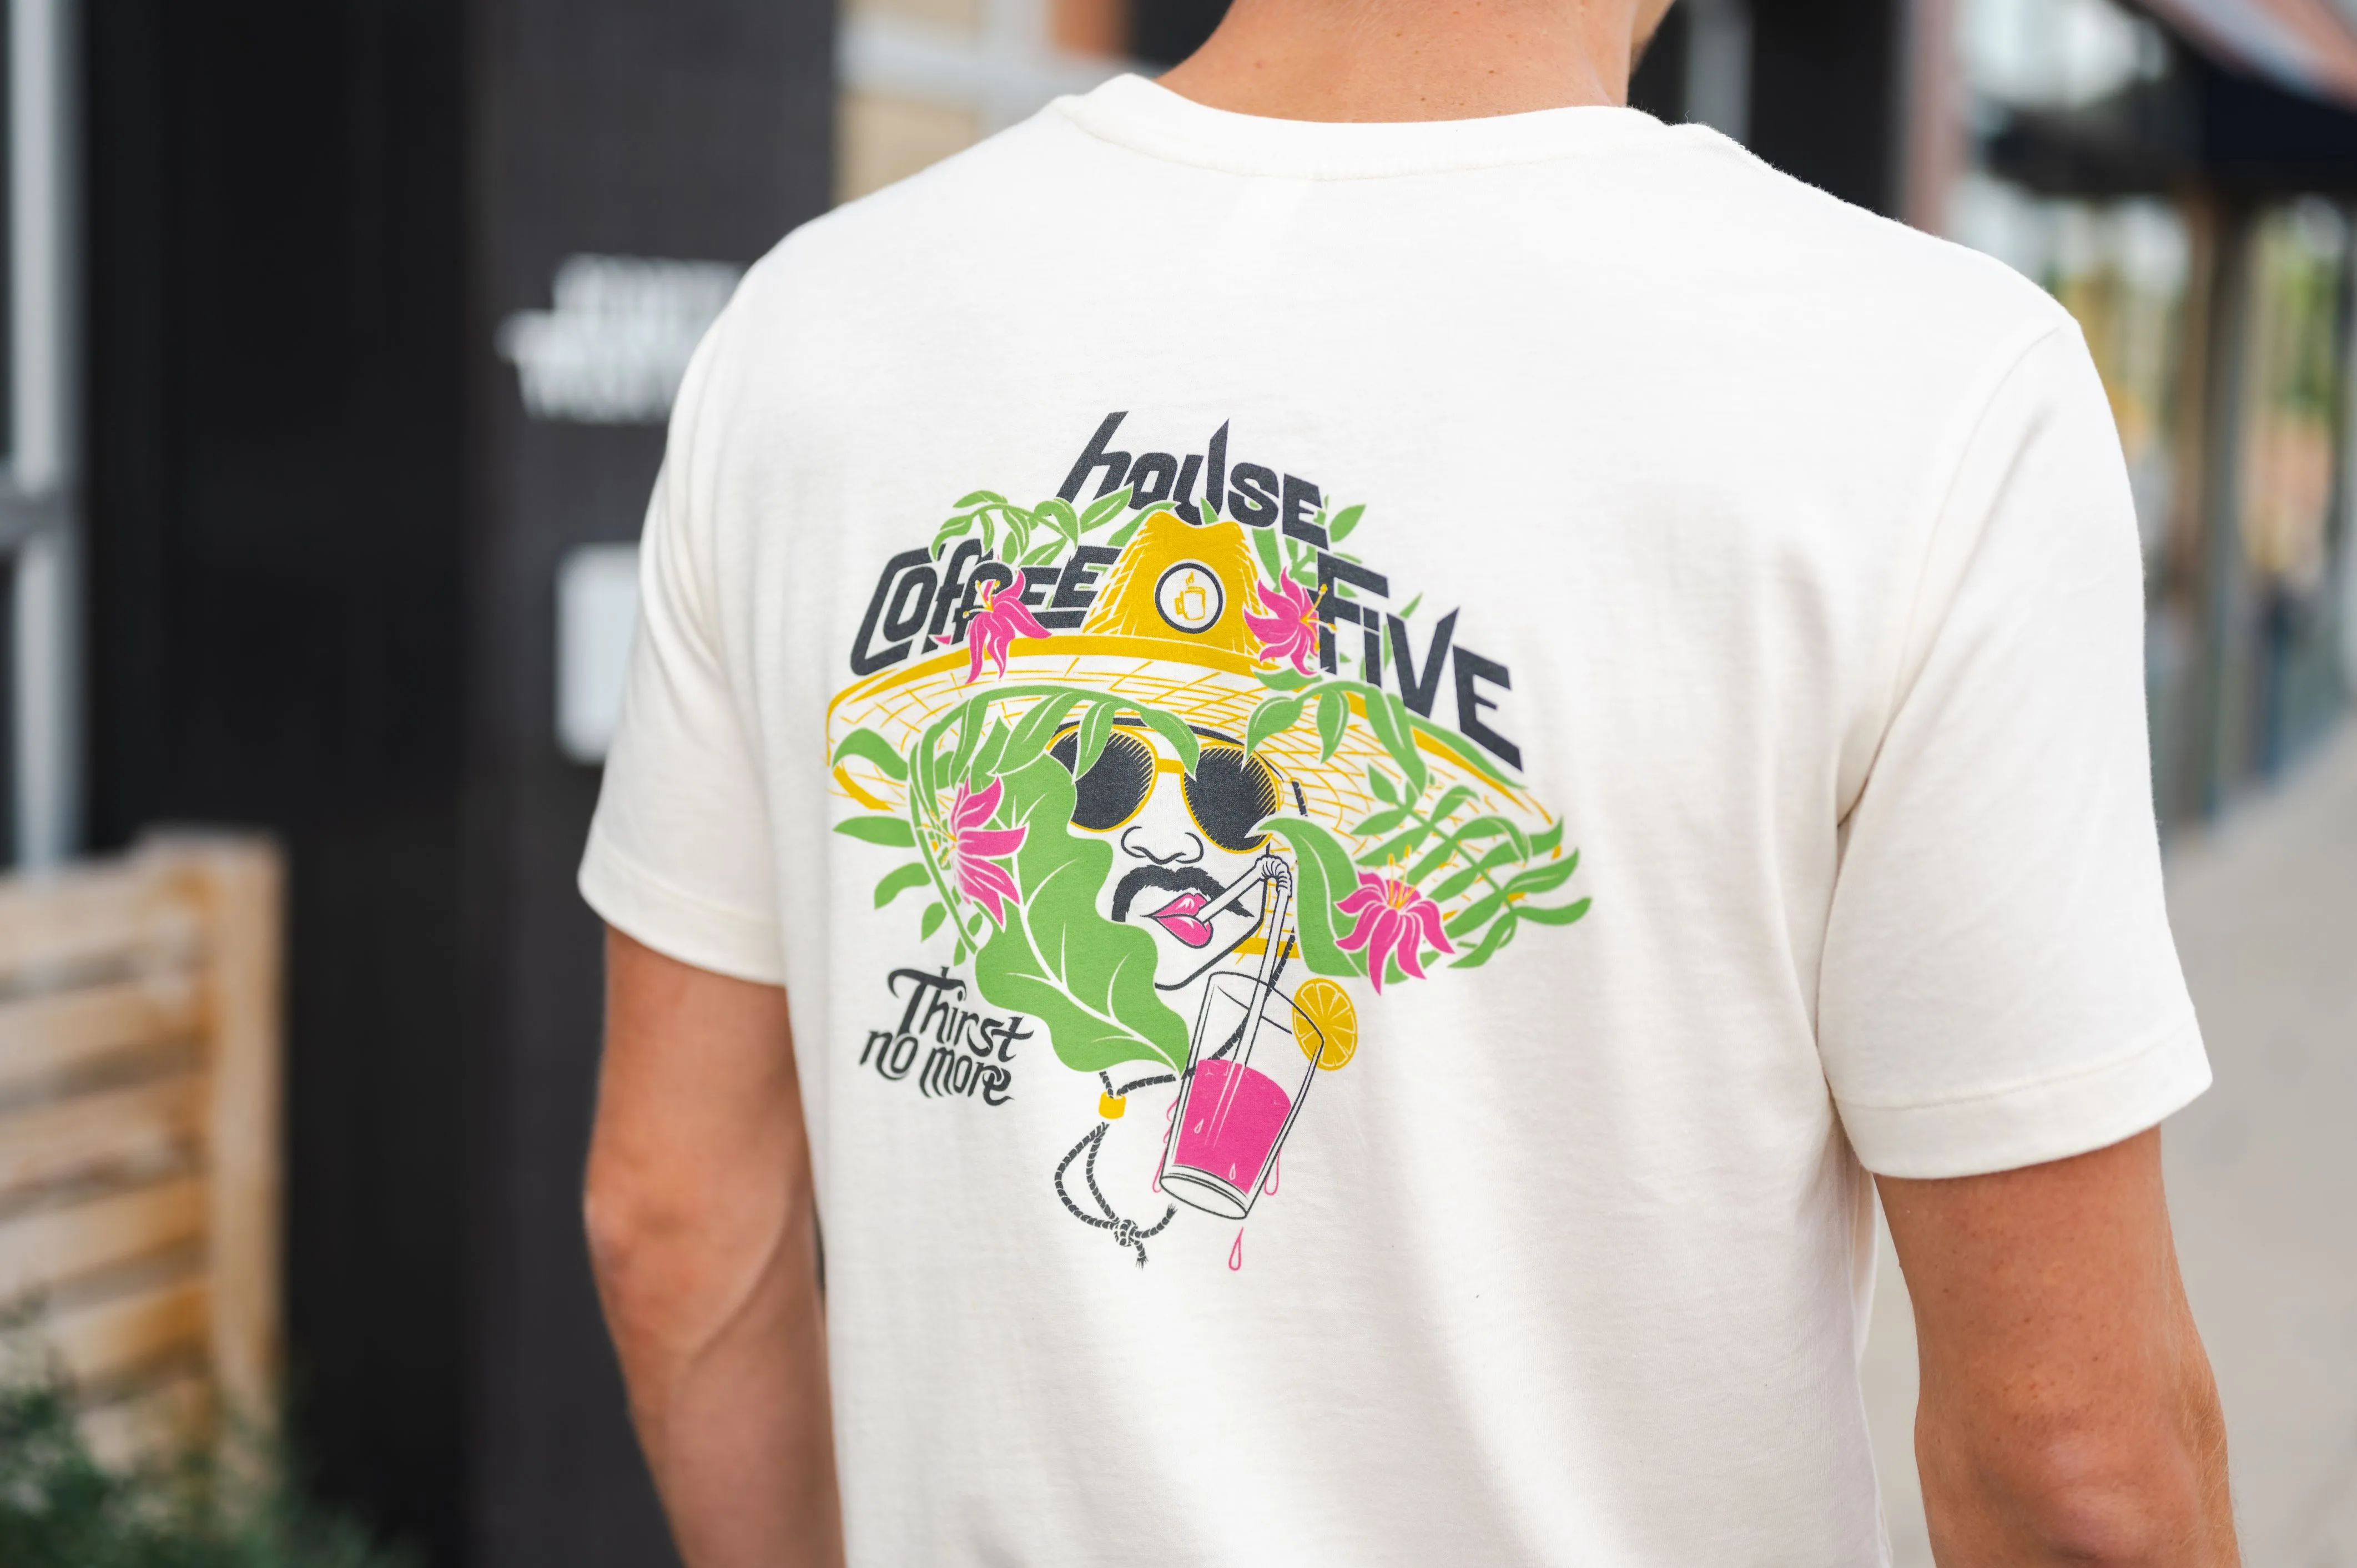 Person wearing a white t-shirt with a colorful graphic of a character in a sombrero surrounded by tropical flora and holding a drink with the text "house coffee five - Thirst no more".